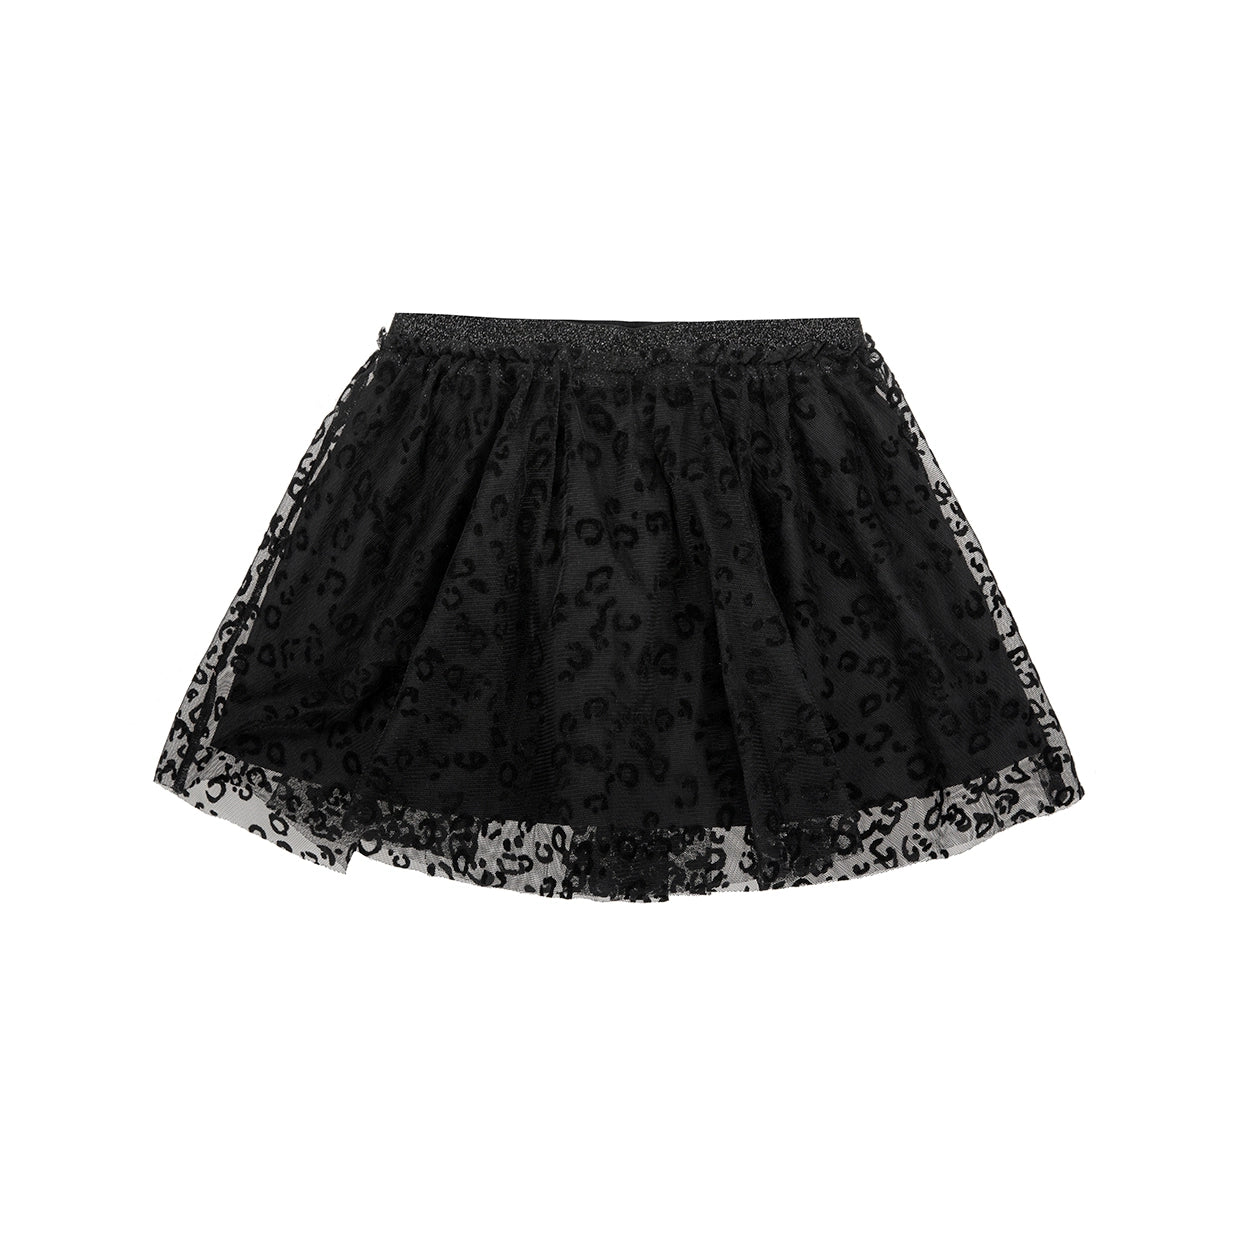 Girl's skirt in tulle with black leopard print.